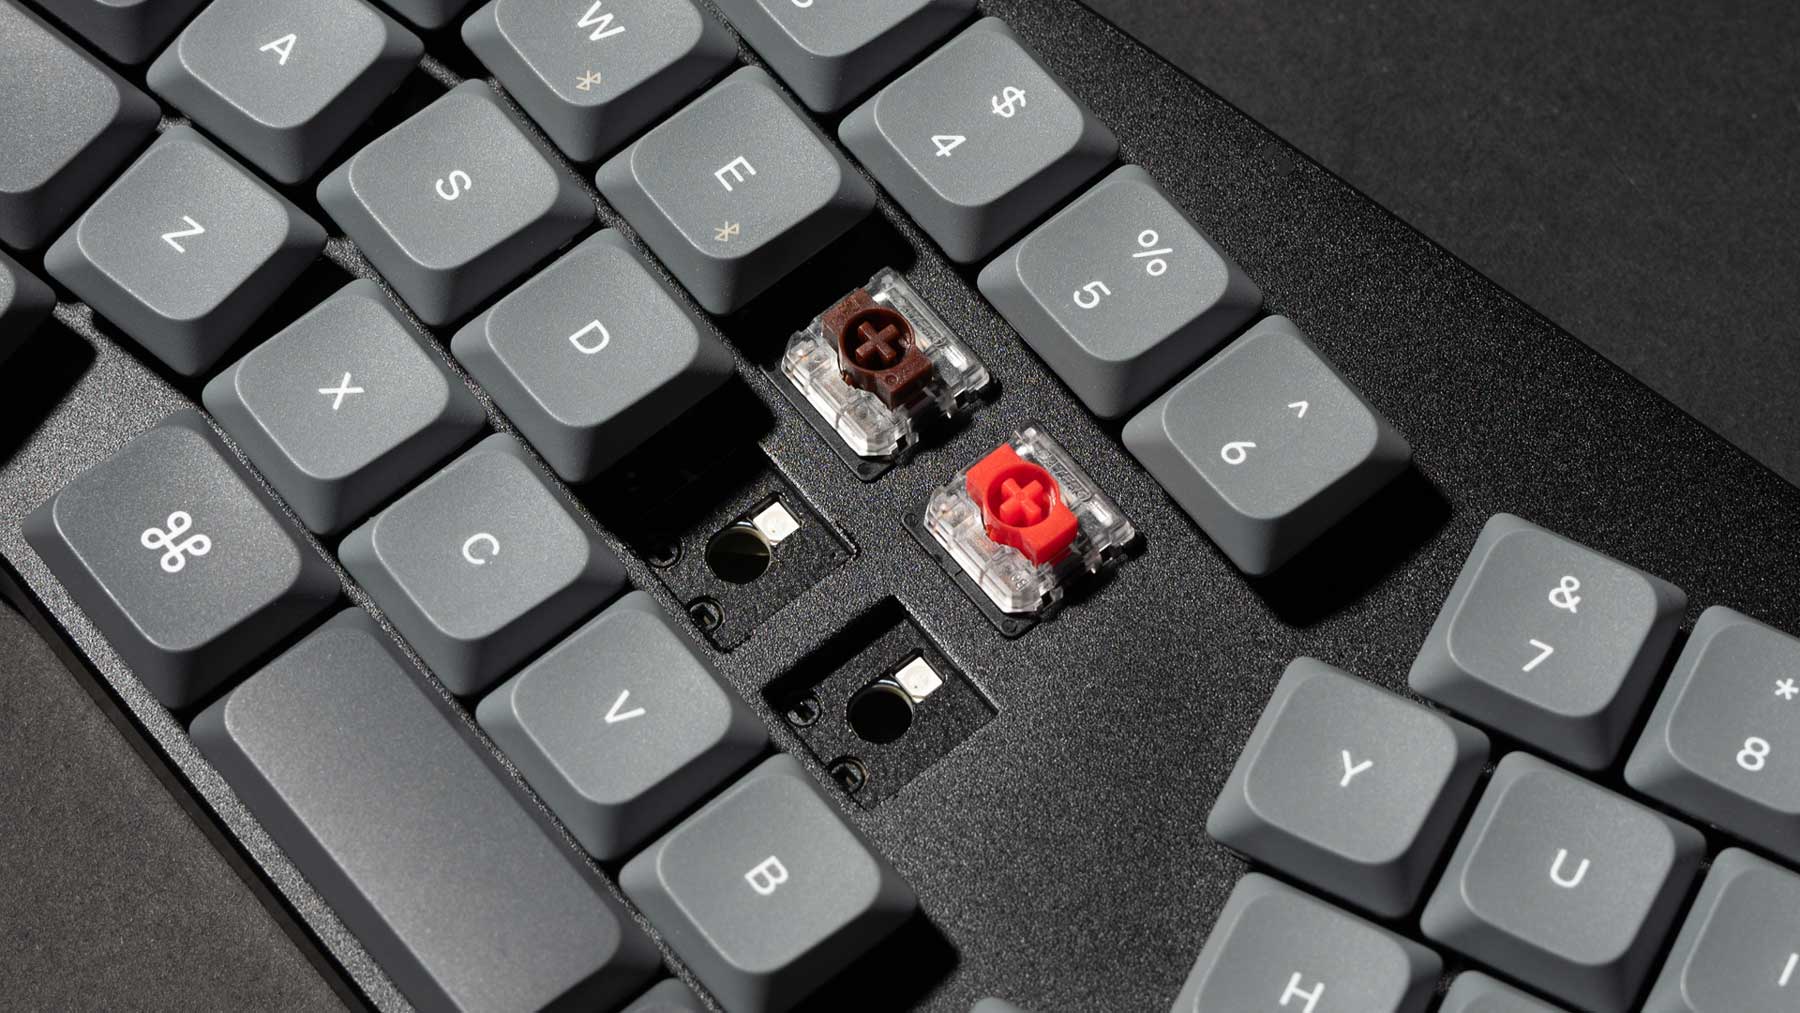 Hot-swapplable feature of the Keychron K11 Max Wireless Mechanical Keyboard